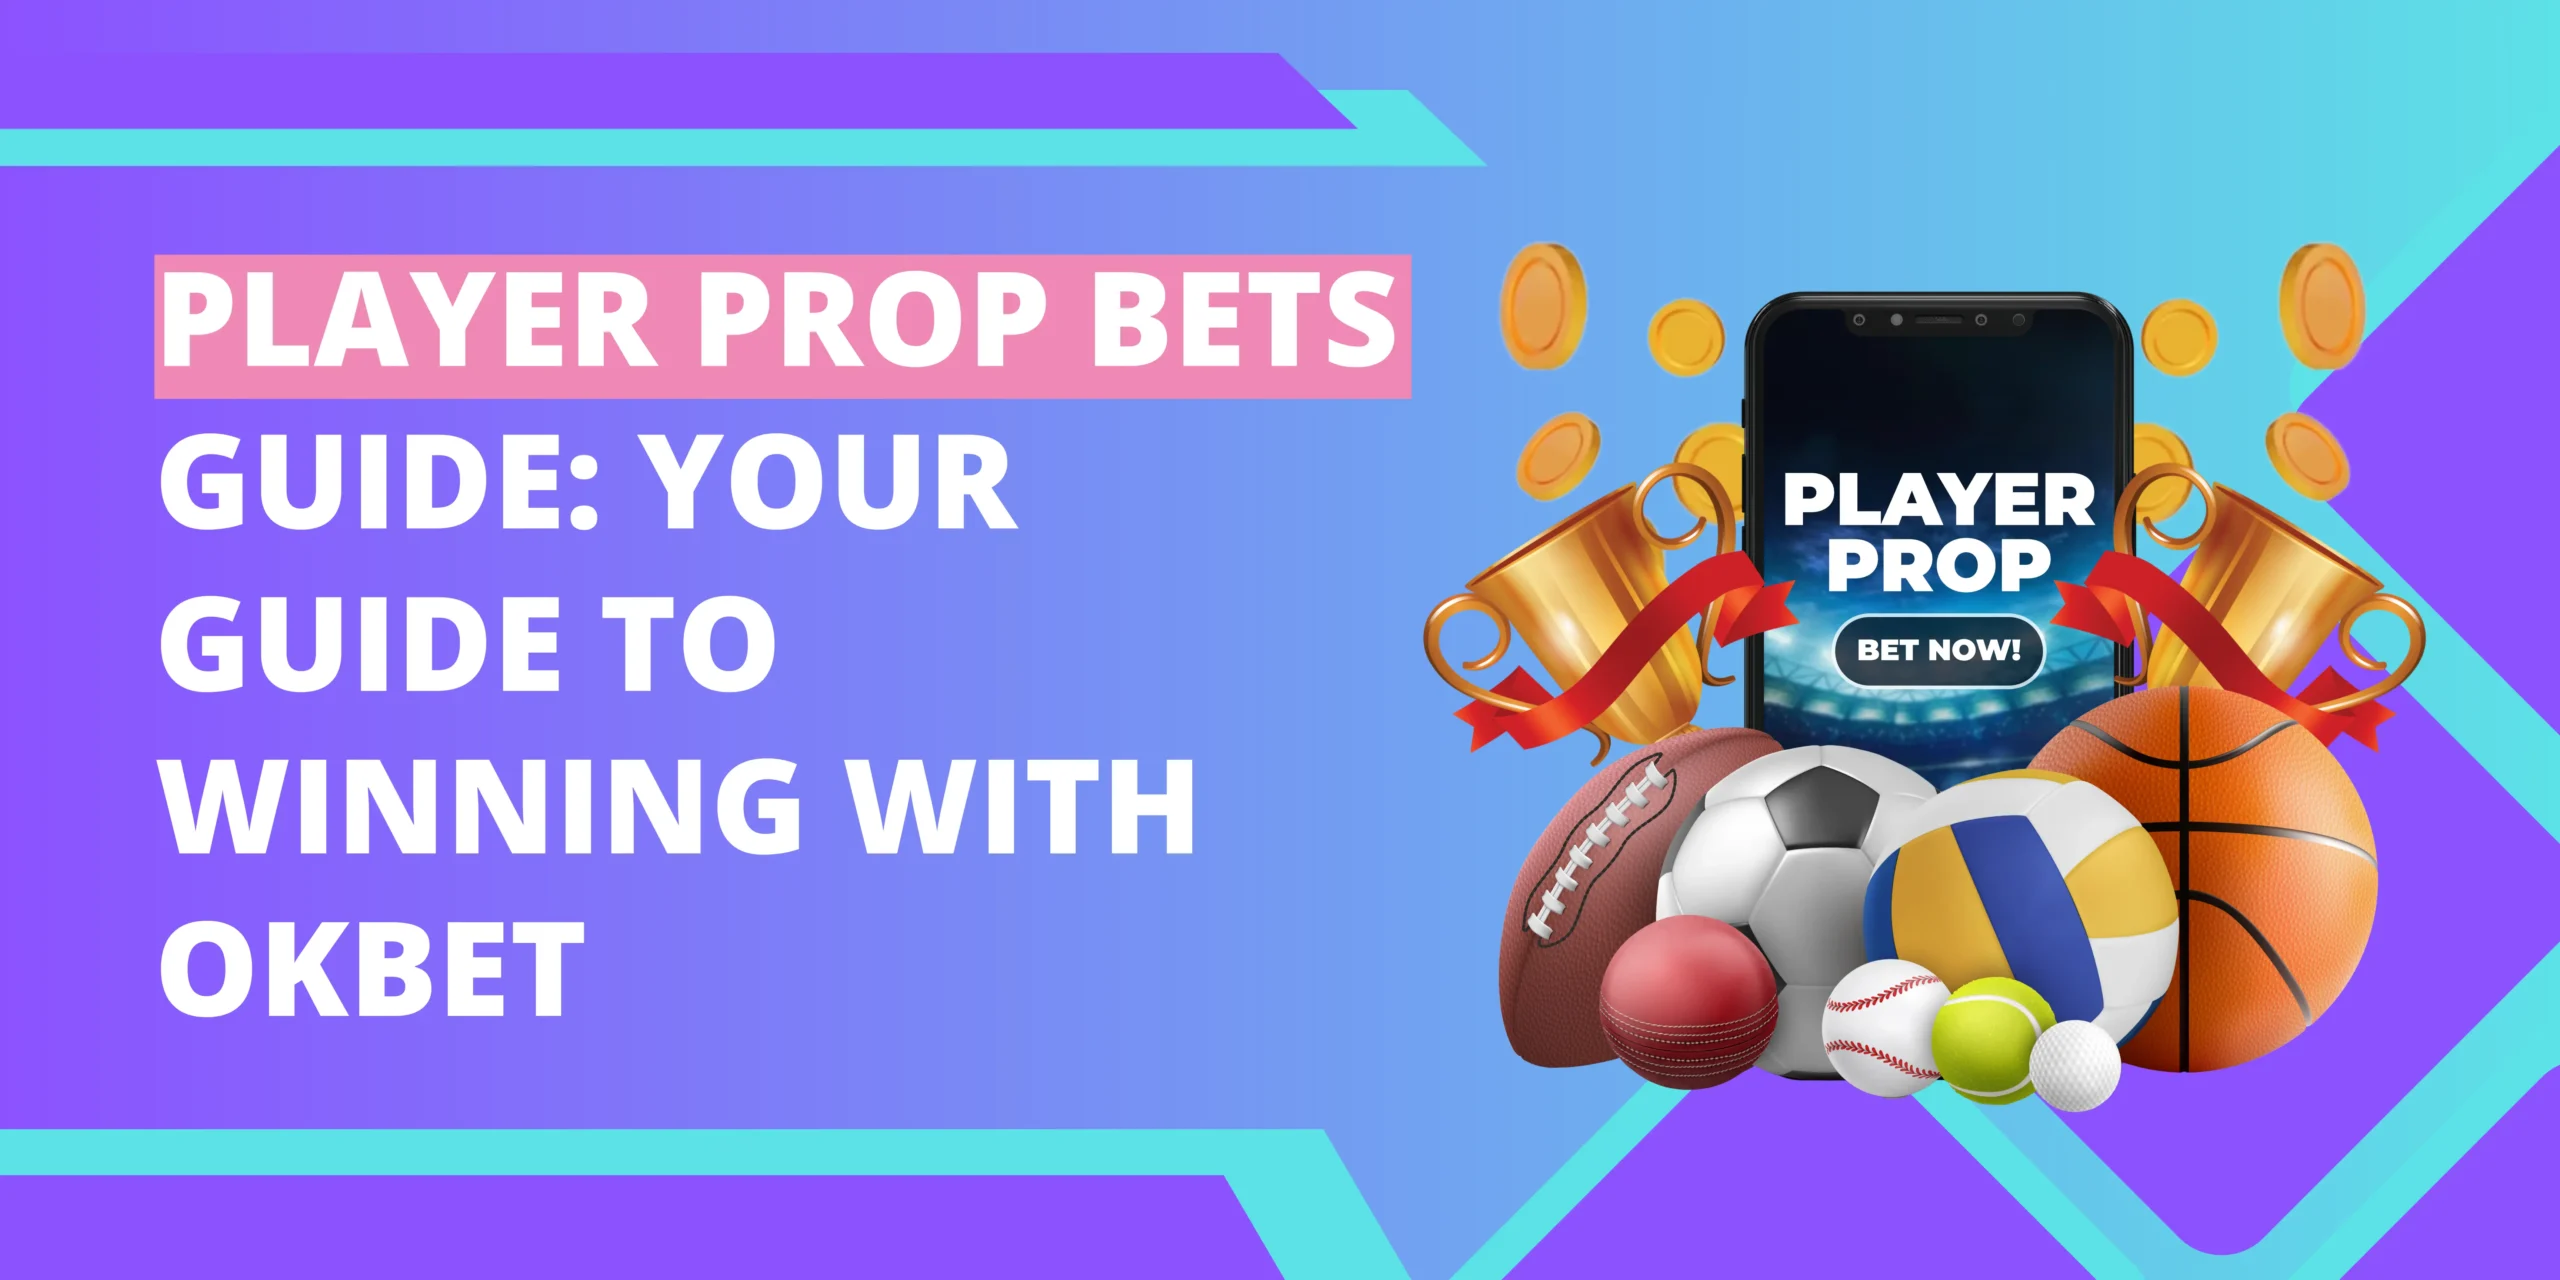 Player Prop Bets Guide: Your Guide to Winning with OKBet